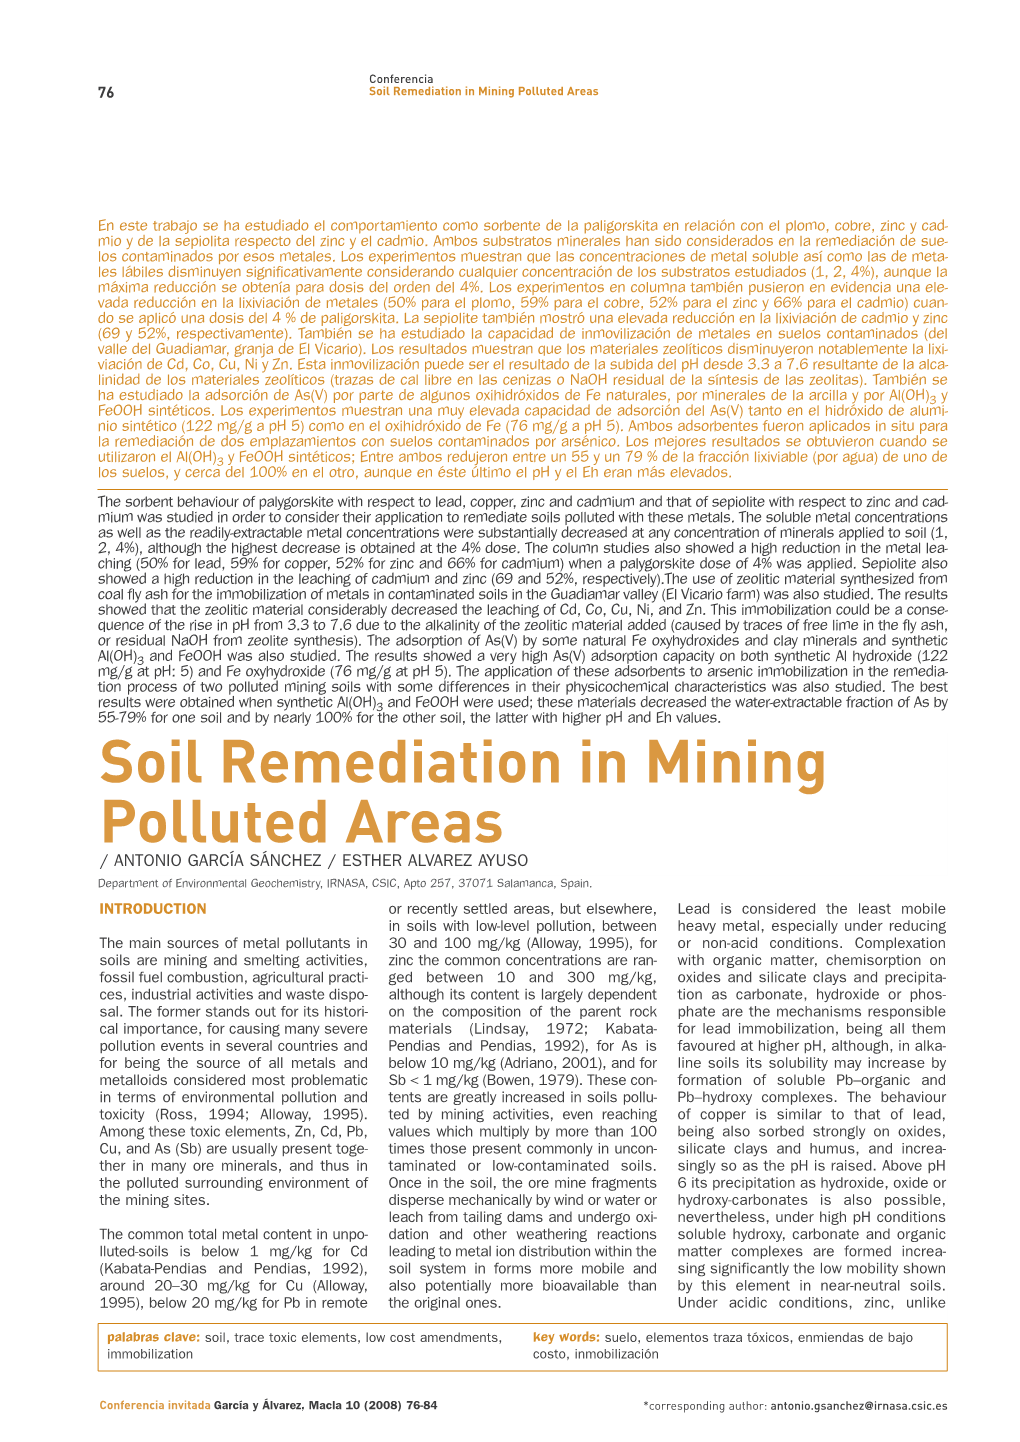 Soil Remediation in Mining Polluted Areas